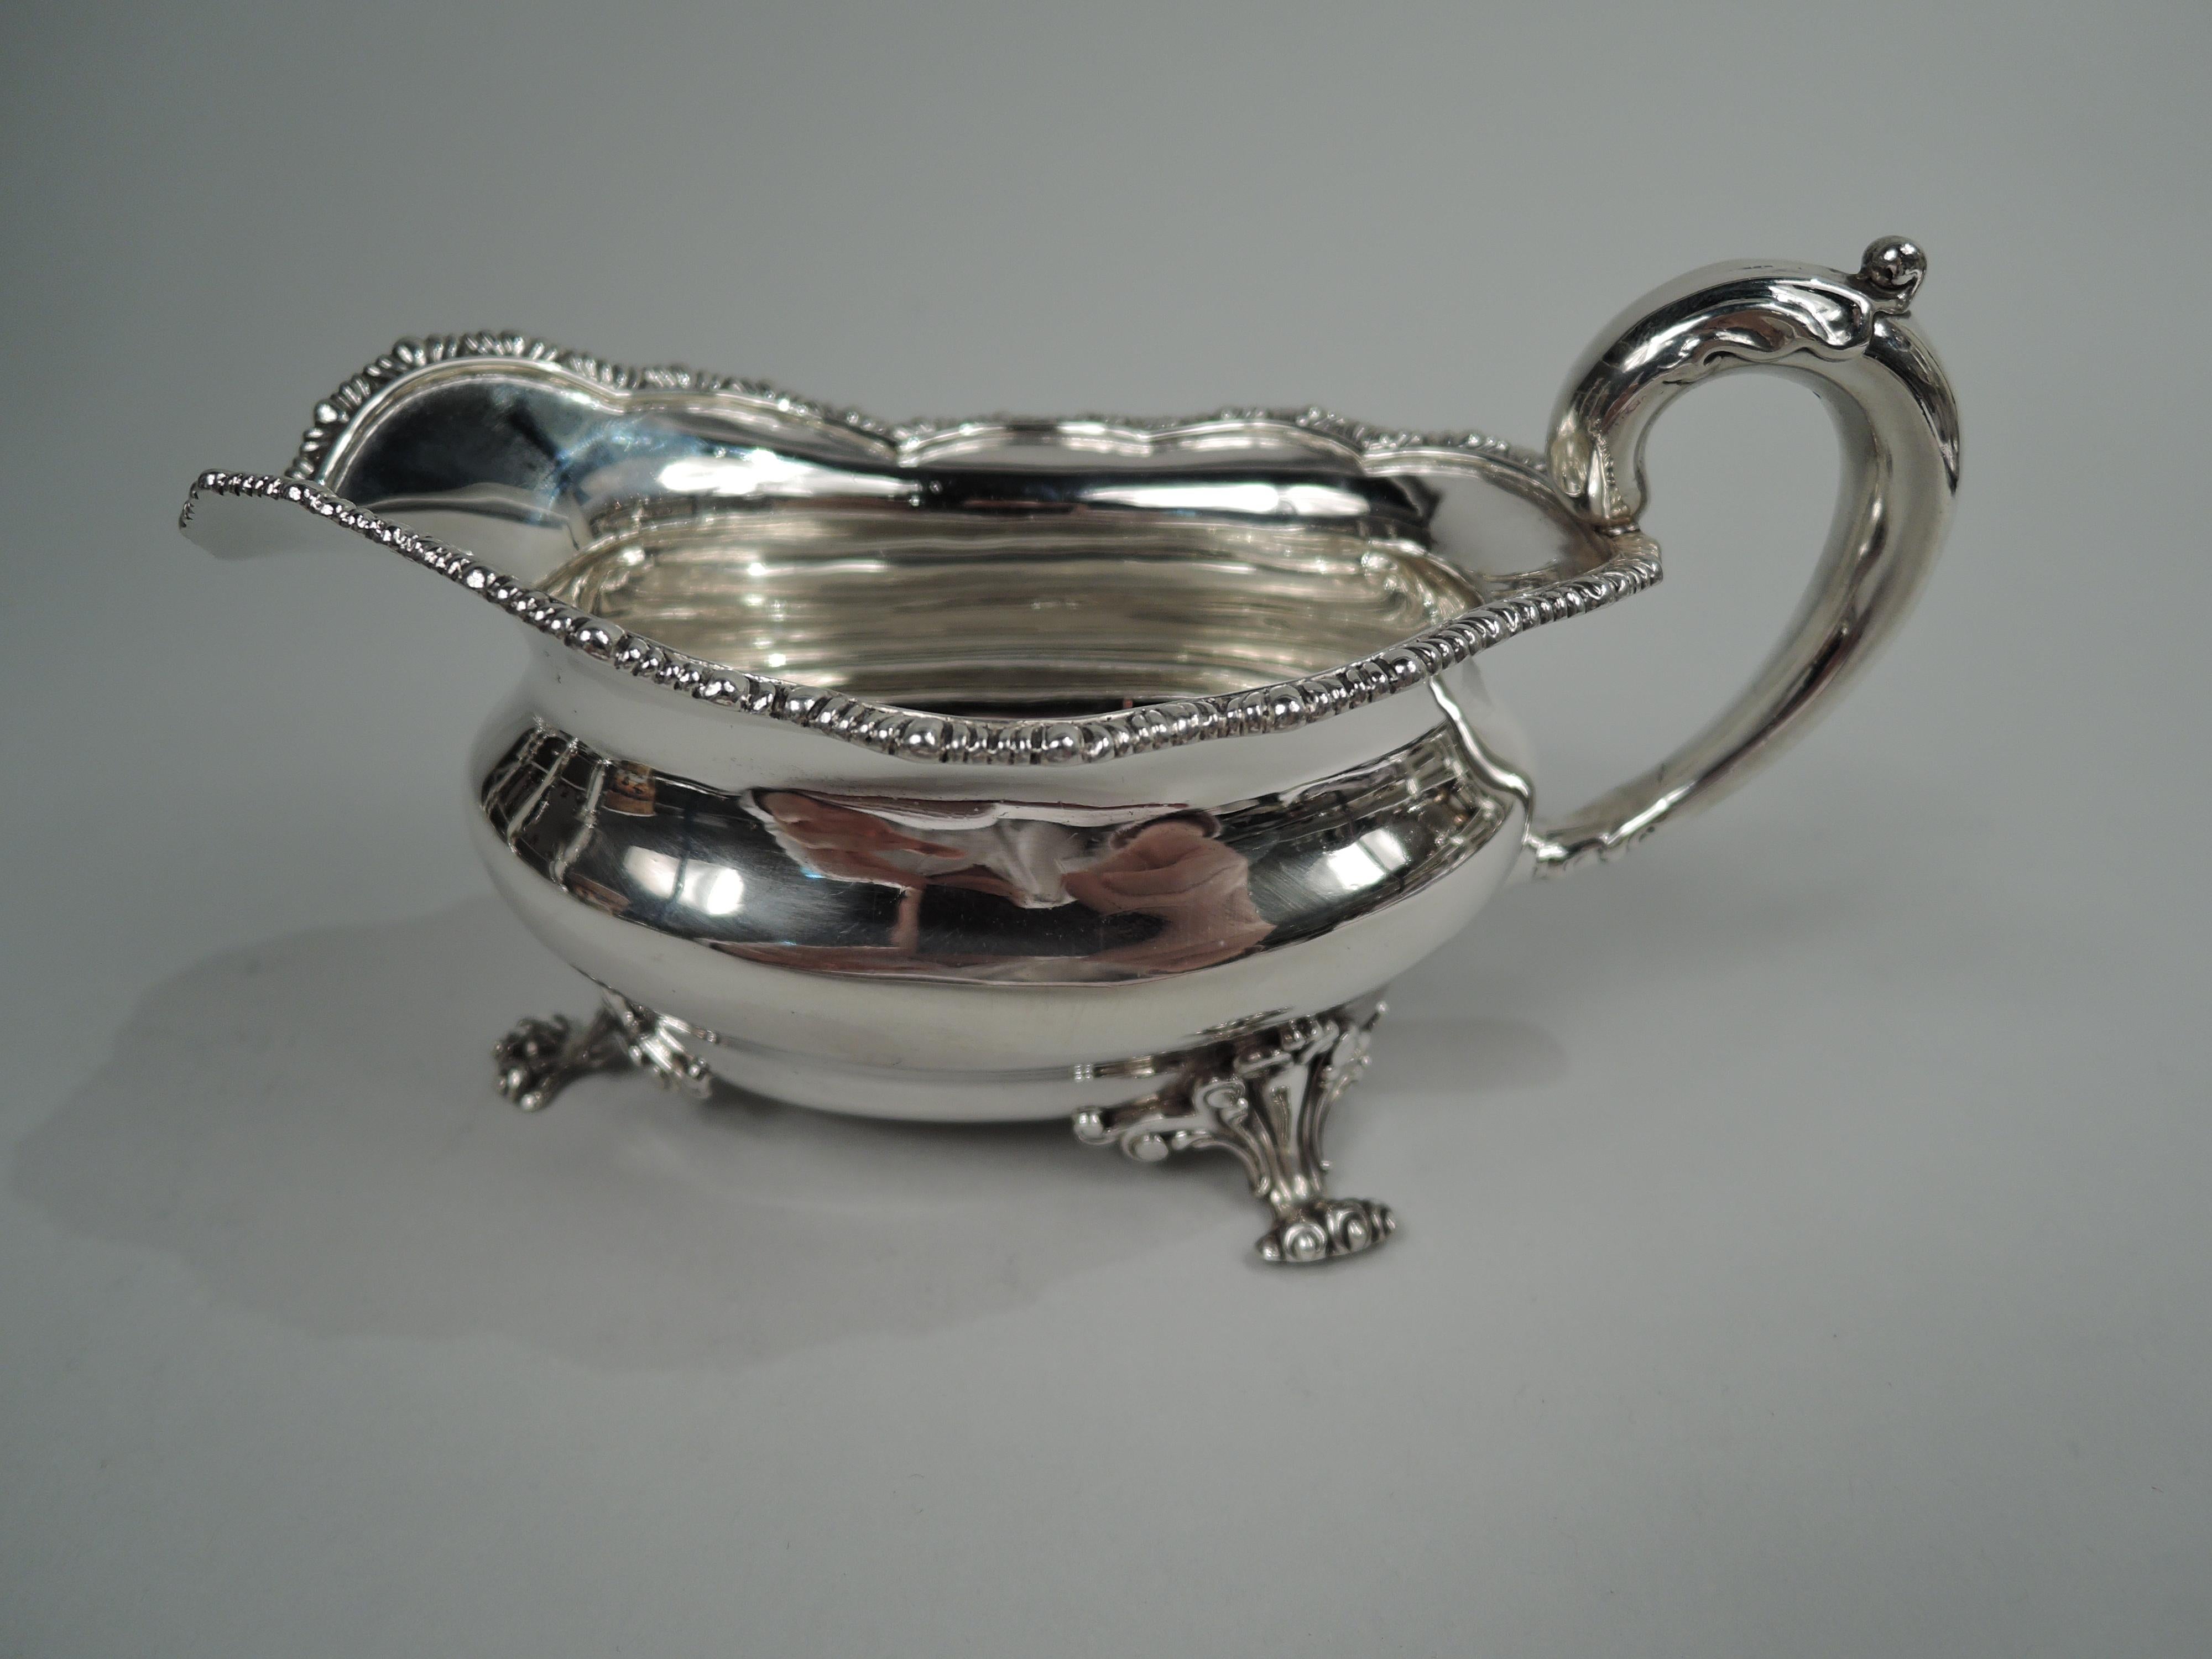 American Georgian sterling silver sauceboat, ca 1900. Retailed by Black, Starr & Frost in New York. Bellied oval bowl with leaf-capped high-looping handle and gadrooned scalloped rim; four scroll-mounted paw supports. Fully marked including